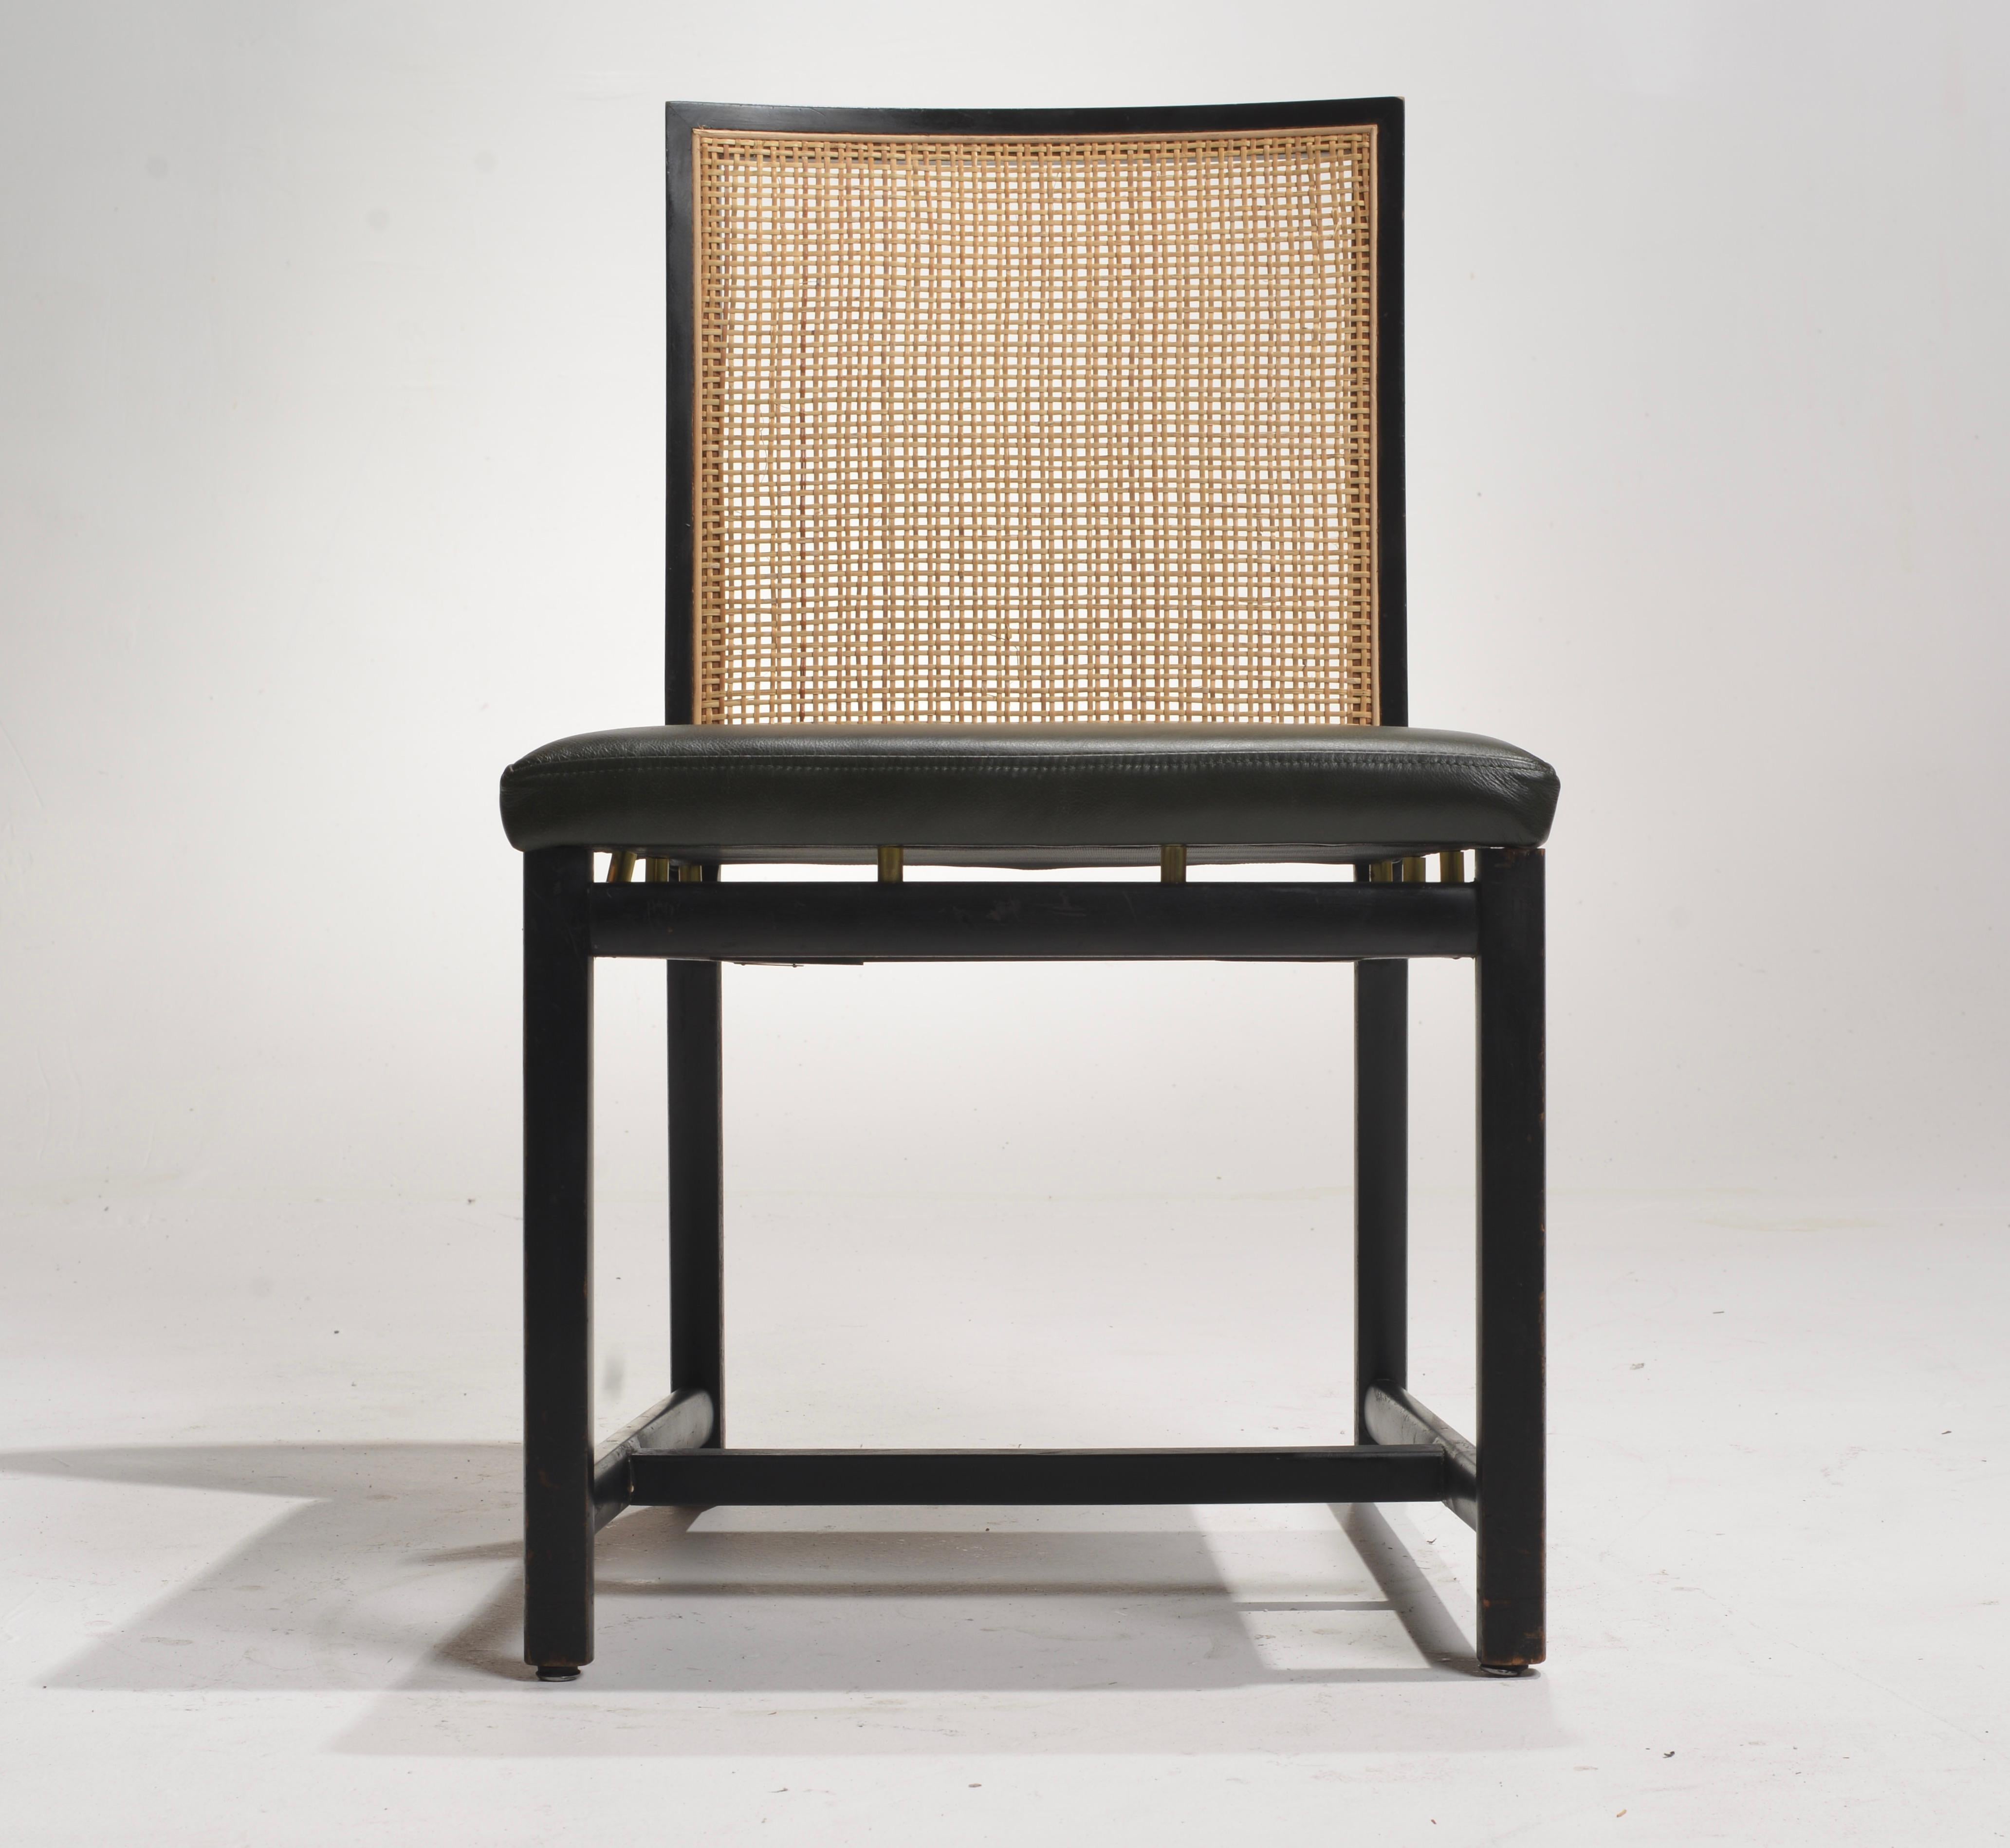 The Black Lacquer Cane Back Dining Chairs by Michael Taylor for Baker feature a sleek black lacquer finish. The cane backrests seamlessly blend traditional craftsmanship with contemporary design. Michael Taylor's visionary approach to luxury is